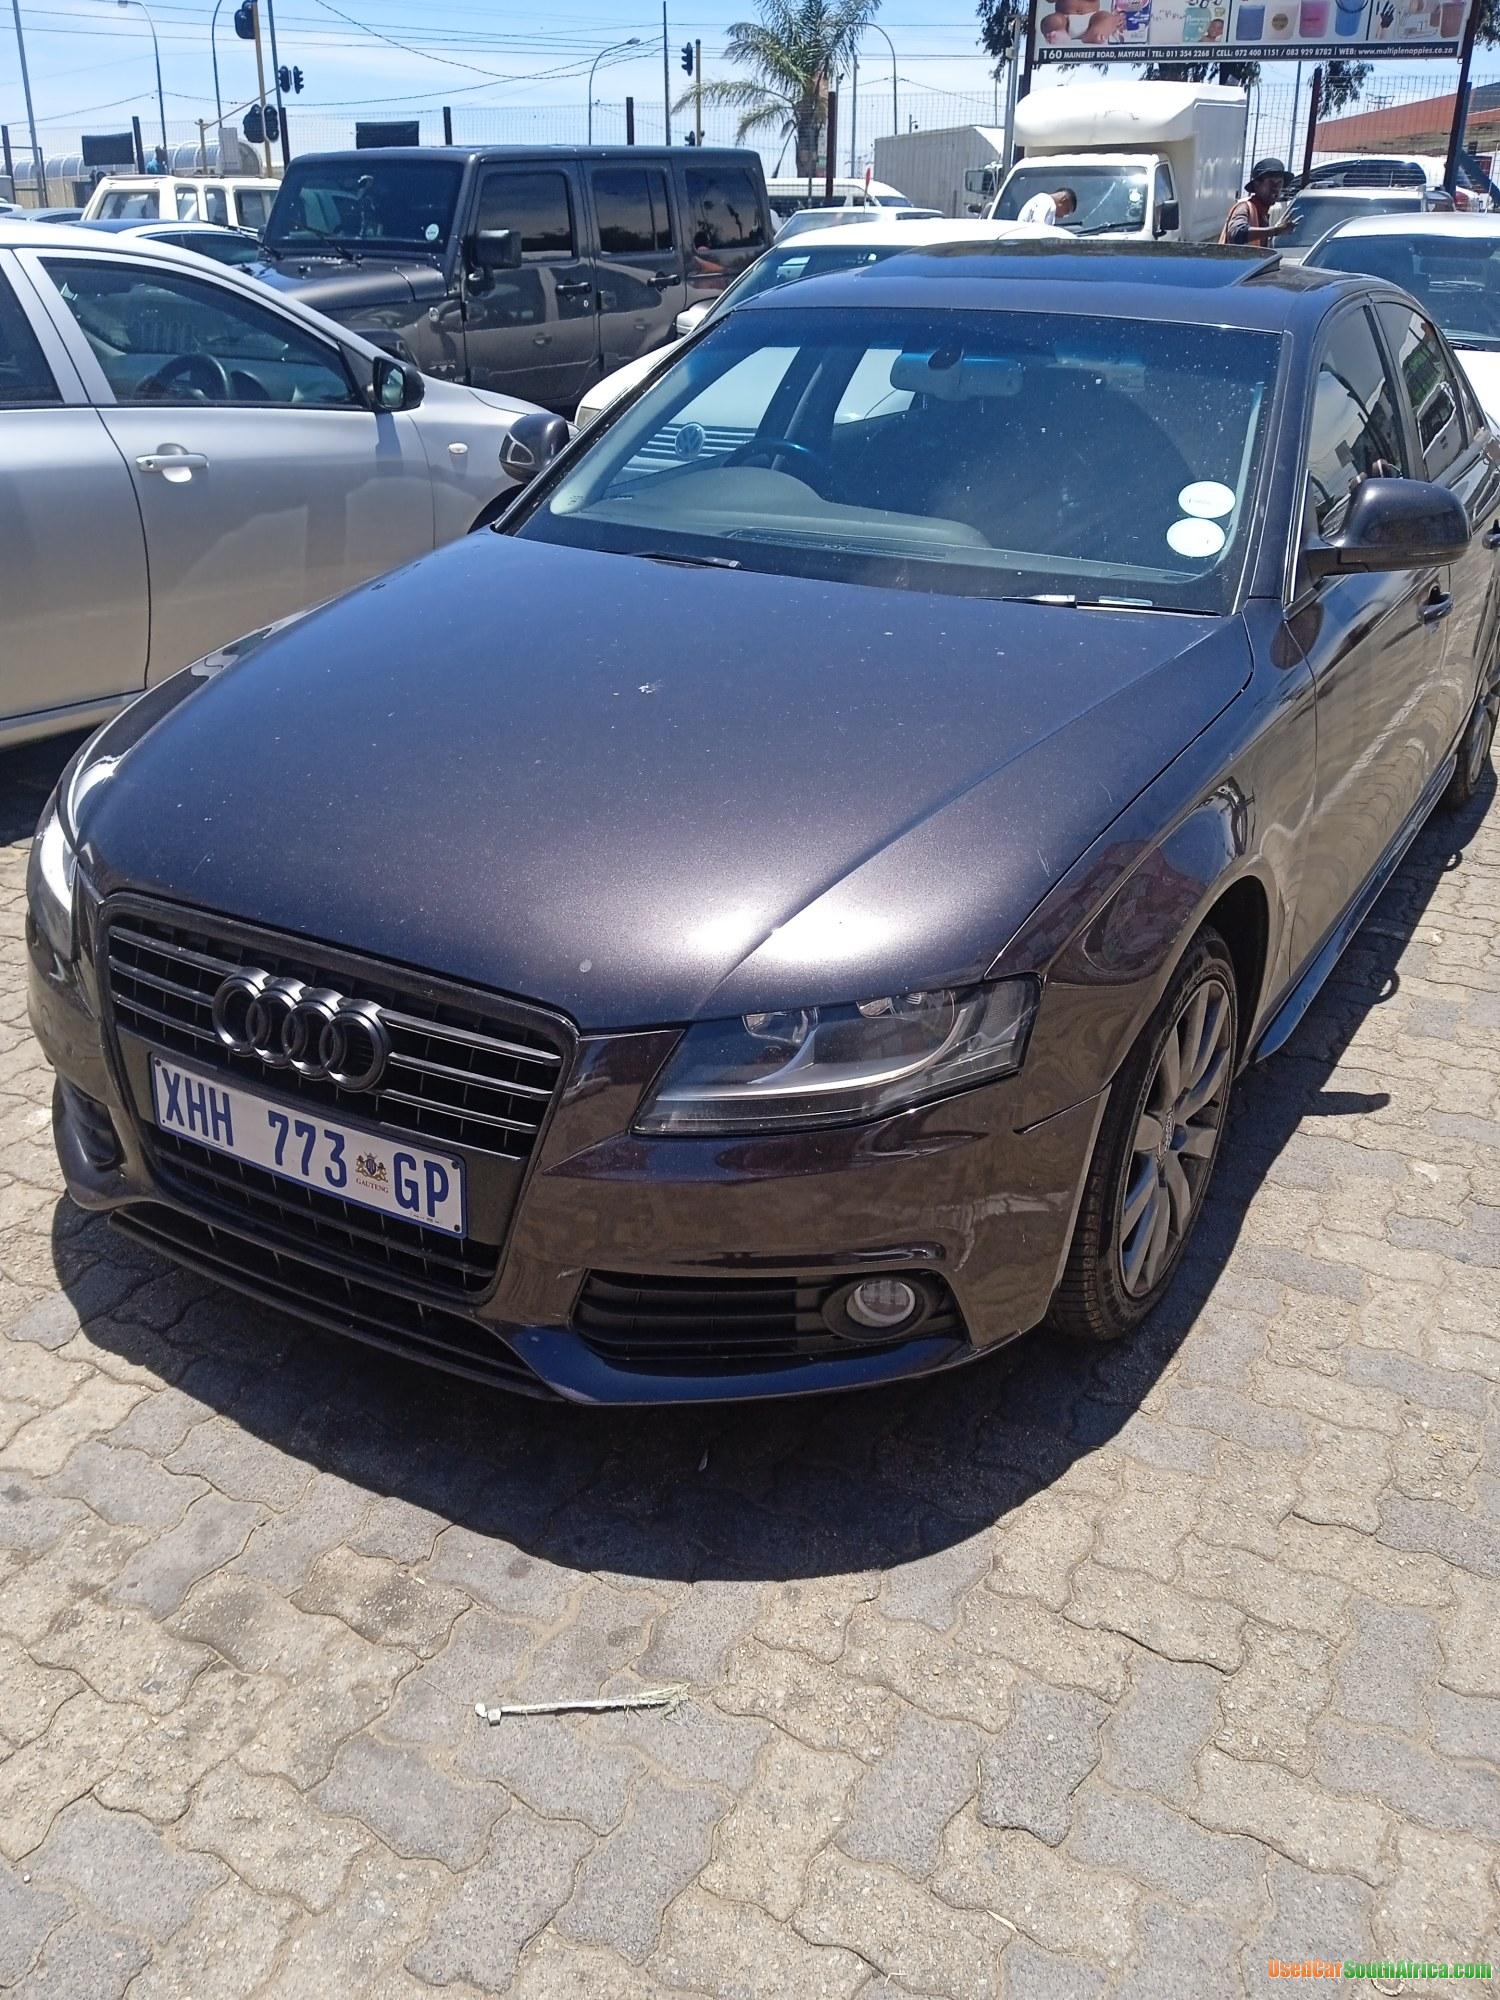 2008 Audi A4 1.8T ambition used car for sale in Johannesburg West Gauteng South Africa - OnlyCars.co.za